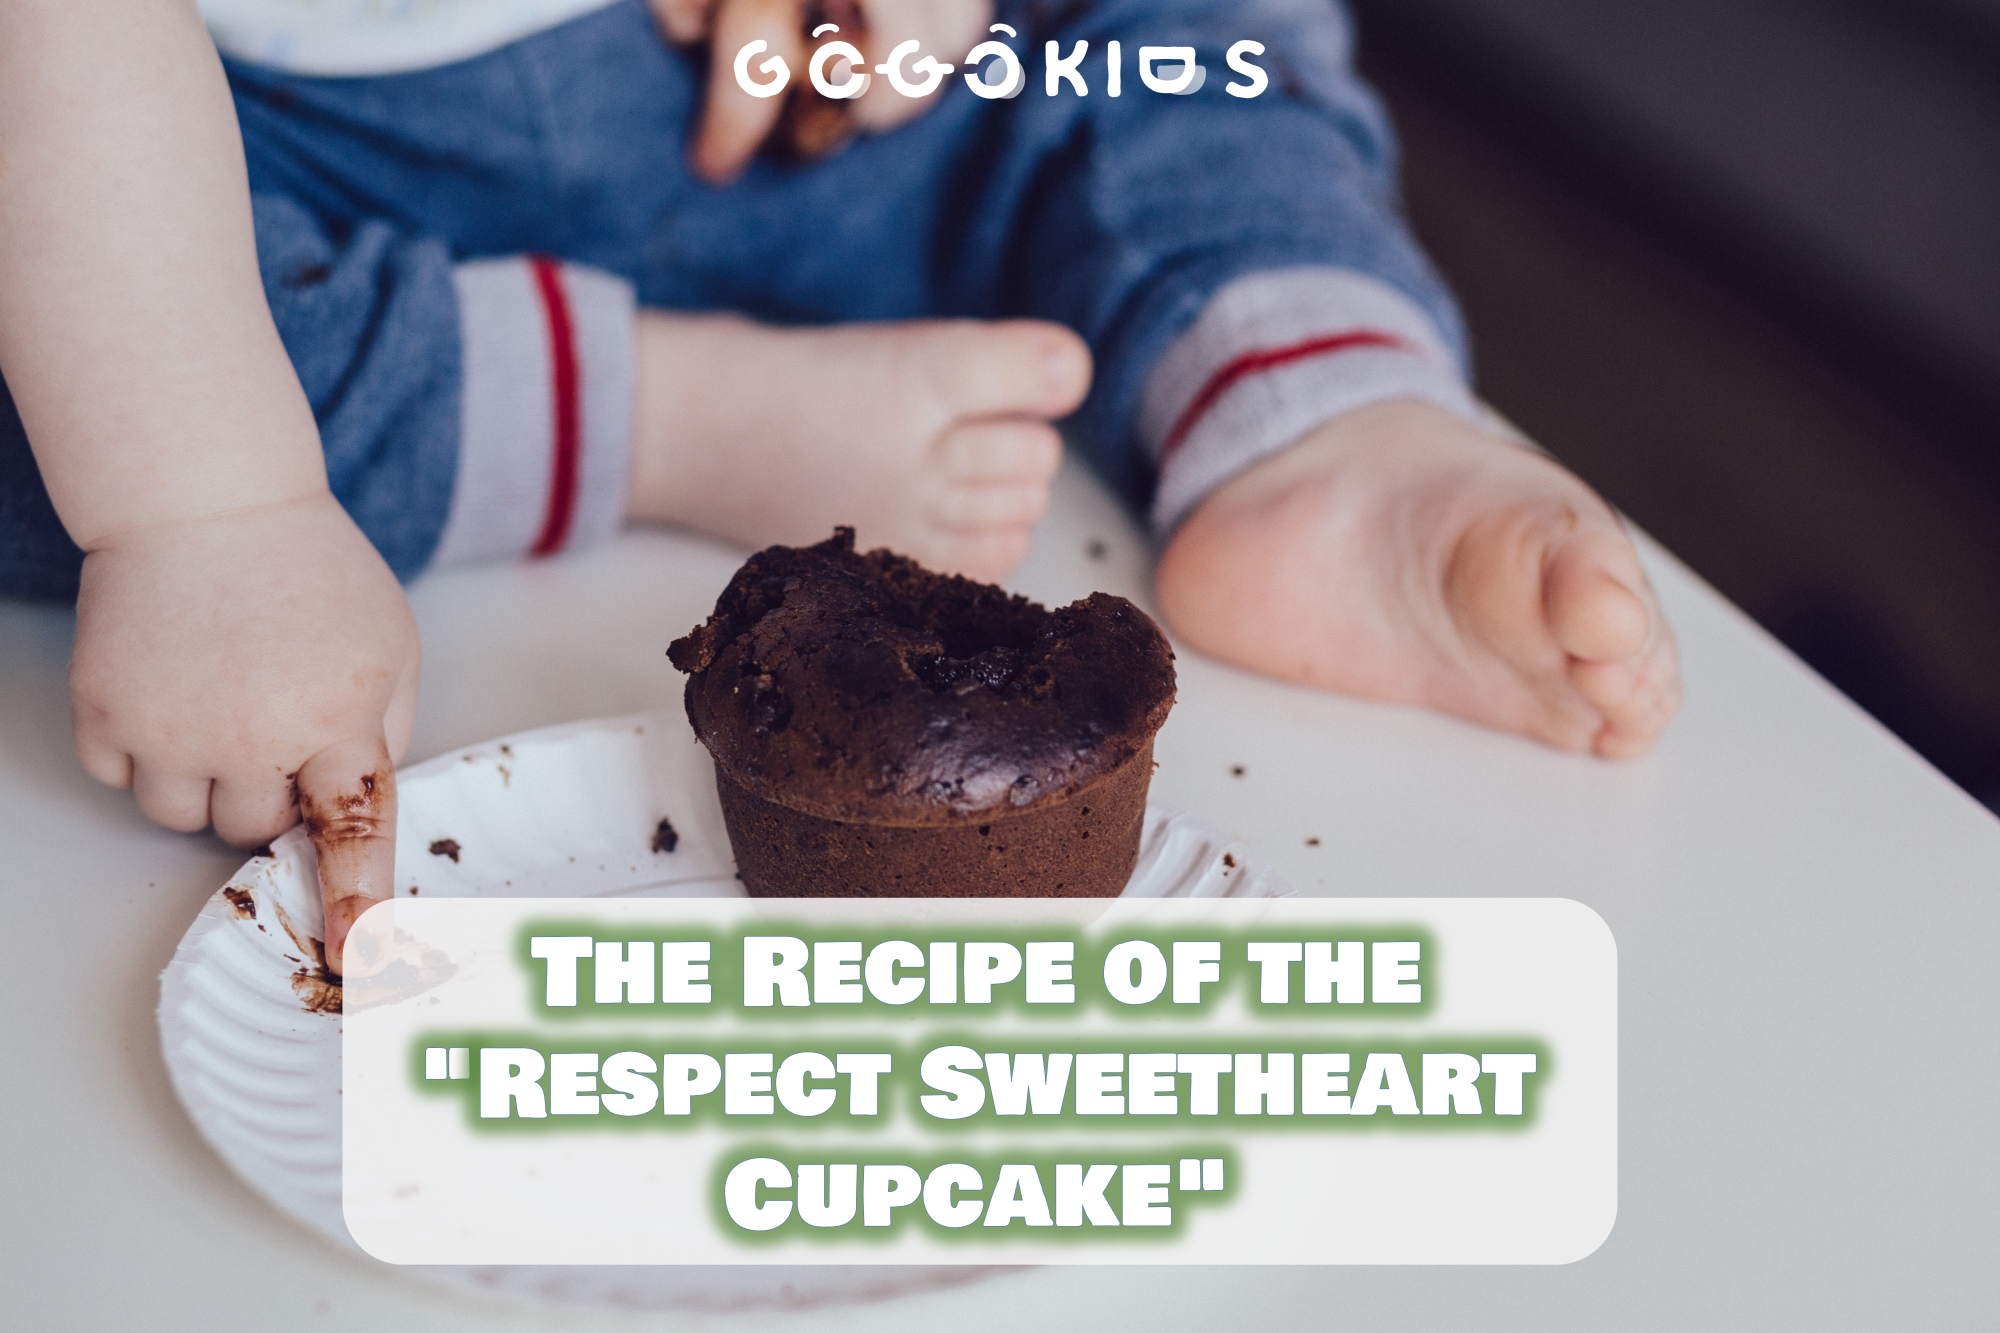 The Recipe of the “Sweetheart Respect Cupcake”